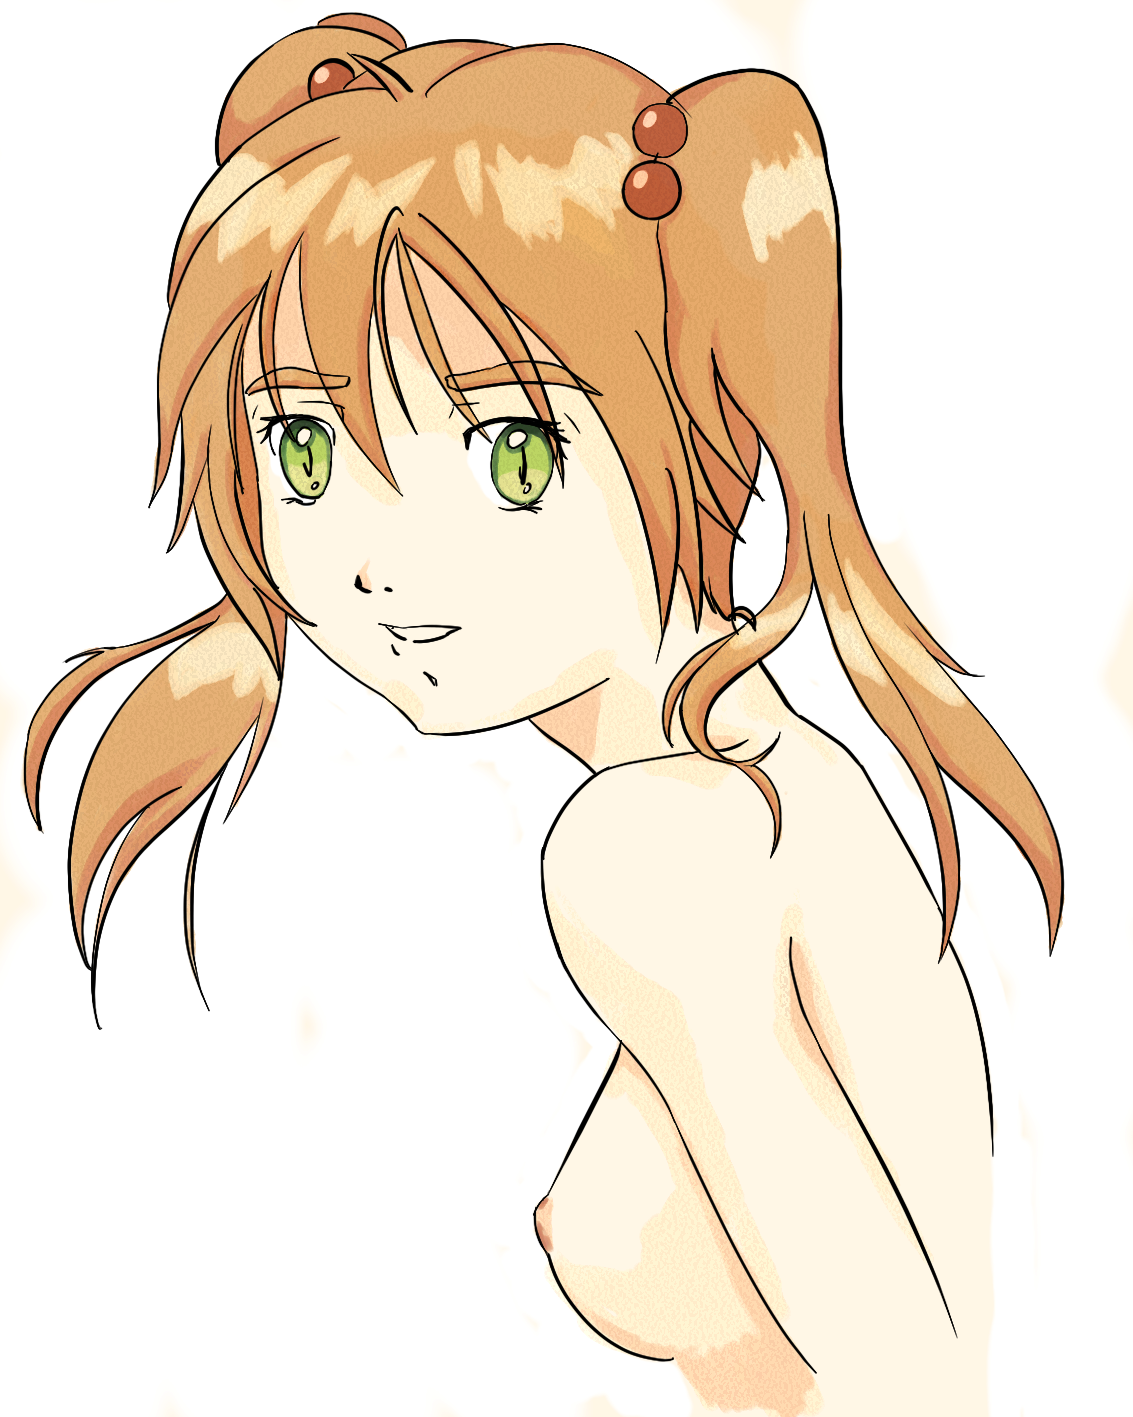 Y'know... Now I'm wondering, why is Emi naked but have her twintails done?